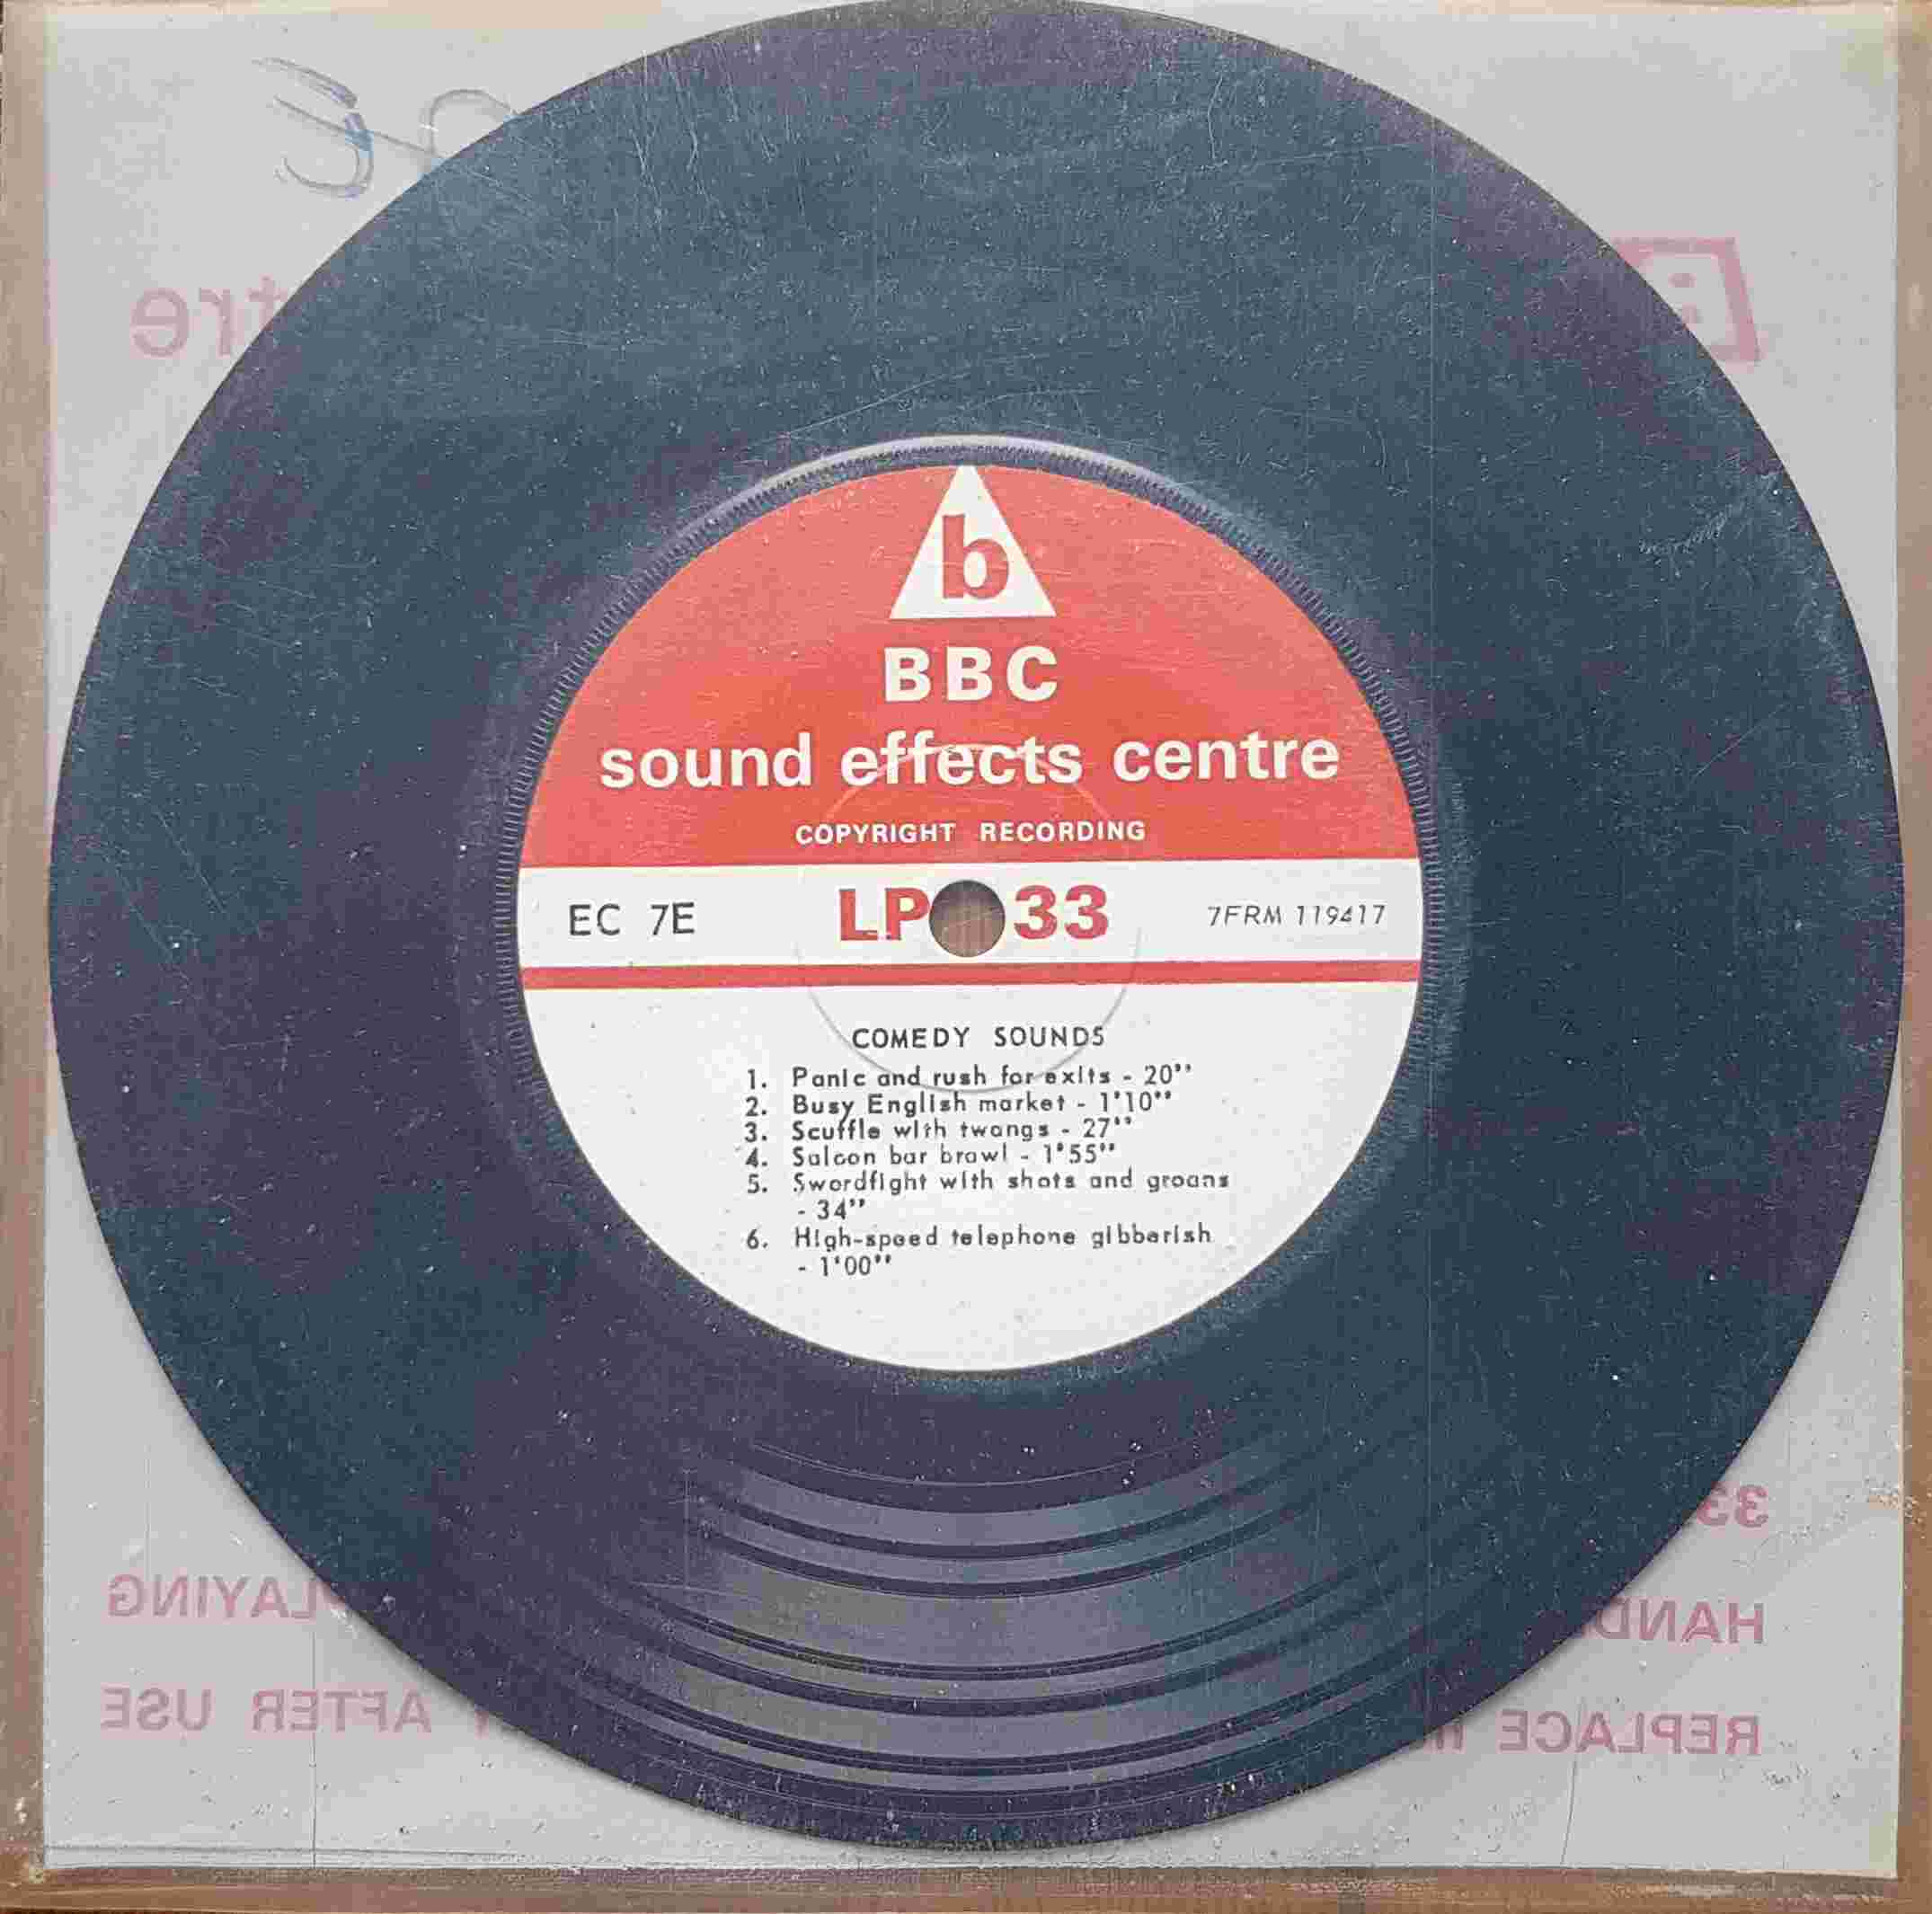 Picture of EC 7E Comedy sounds by artist Not registered from the BBC records and Tapes library